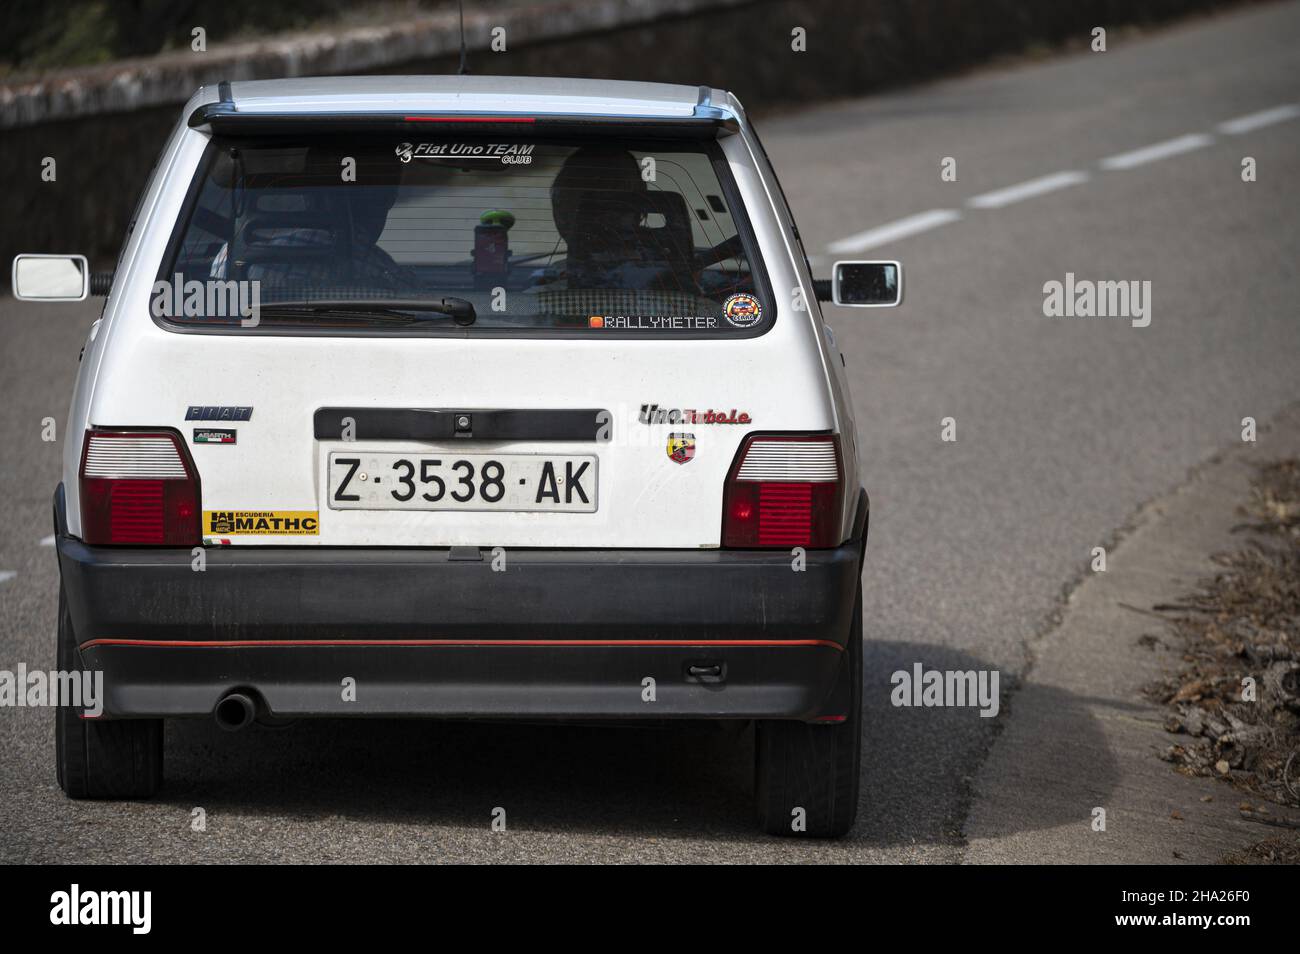 BARCELONA, SPAIN - Nov 11, 2021: A man driving Fiat Uno Turbo 1.4 IE Mk2 Rallye on a highway in Catalonia, Spain Stock Photo